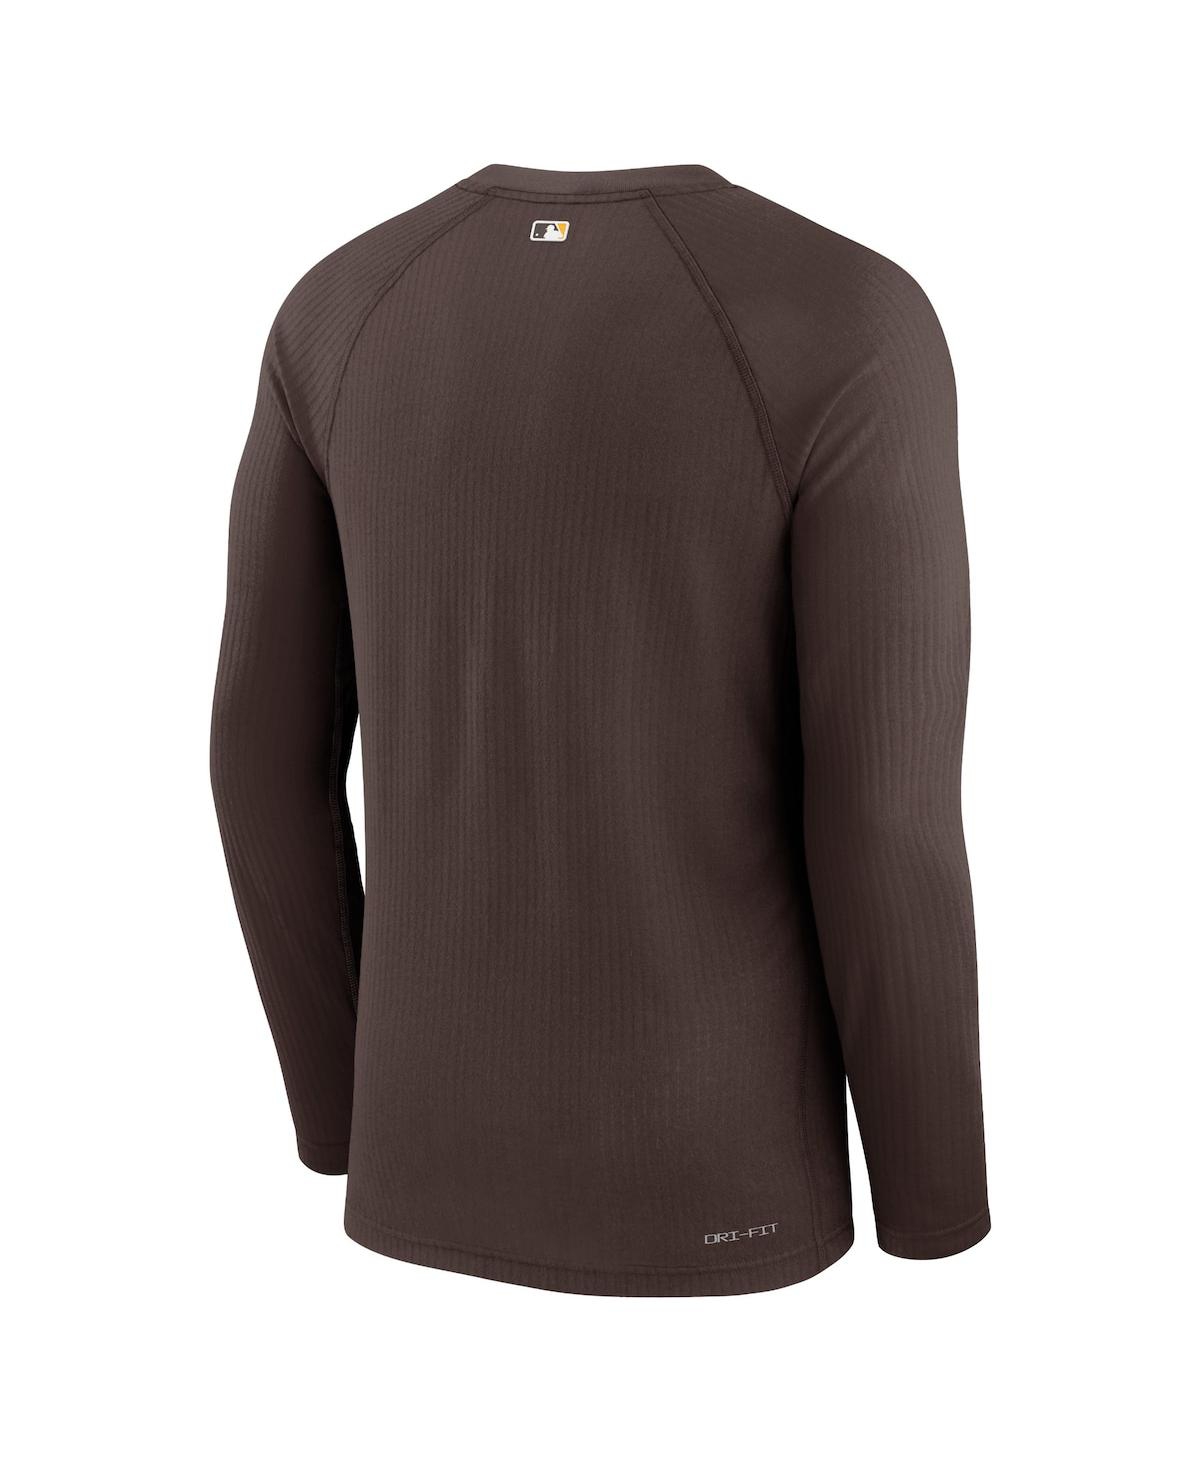 Shop Nike Men's  Brown San Diego Padres Authentic Collection Raglan Performance Long Sleeve T-shirt